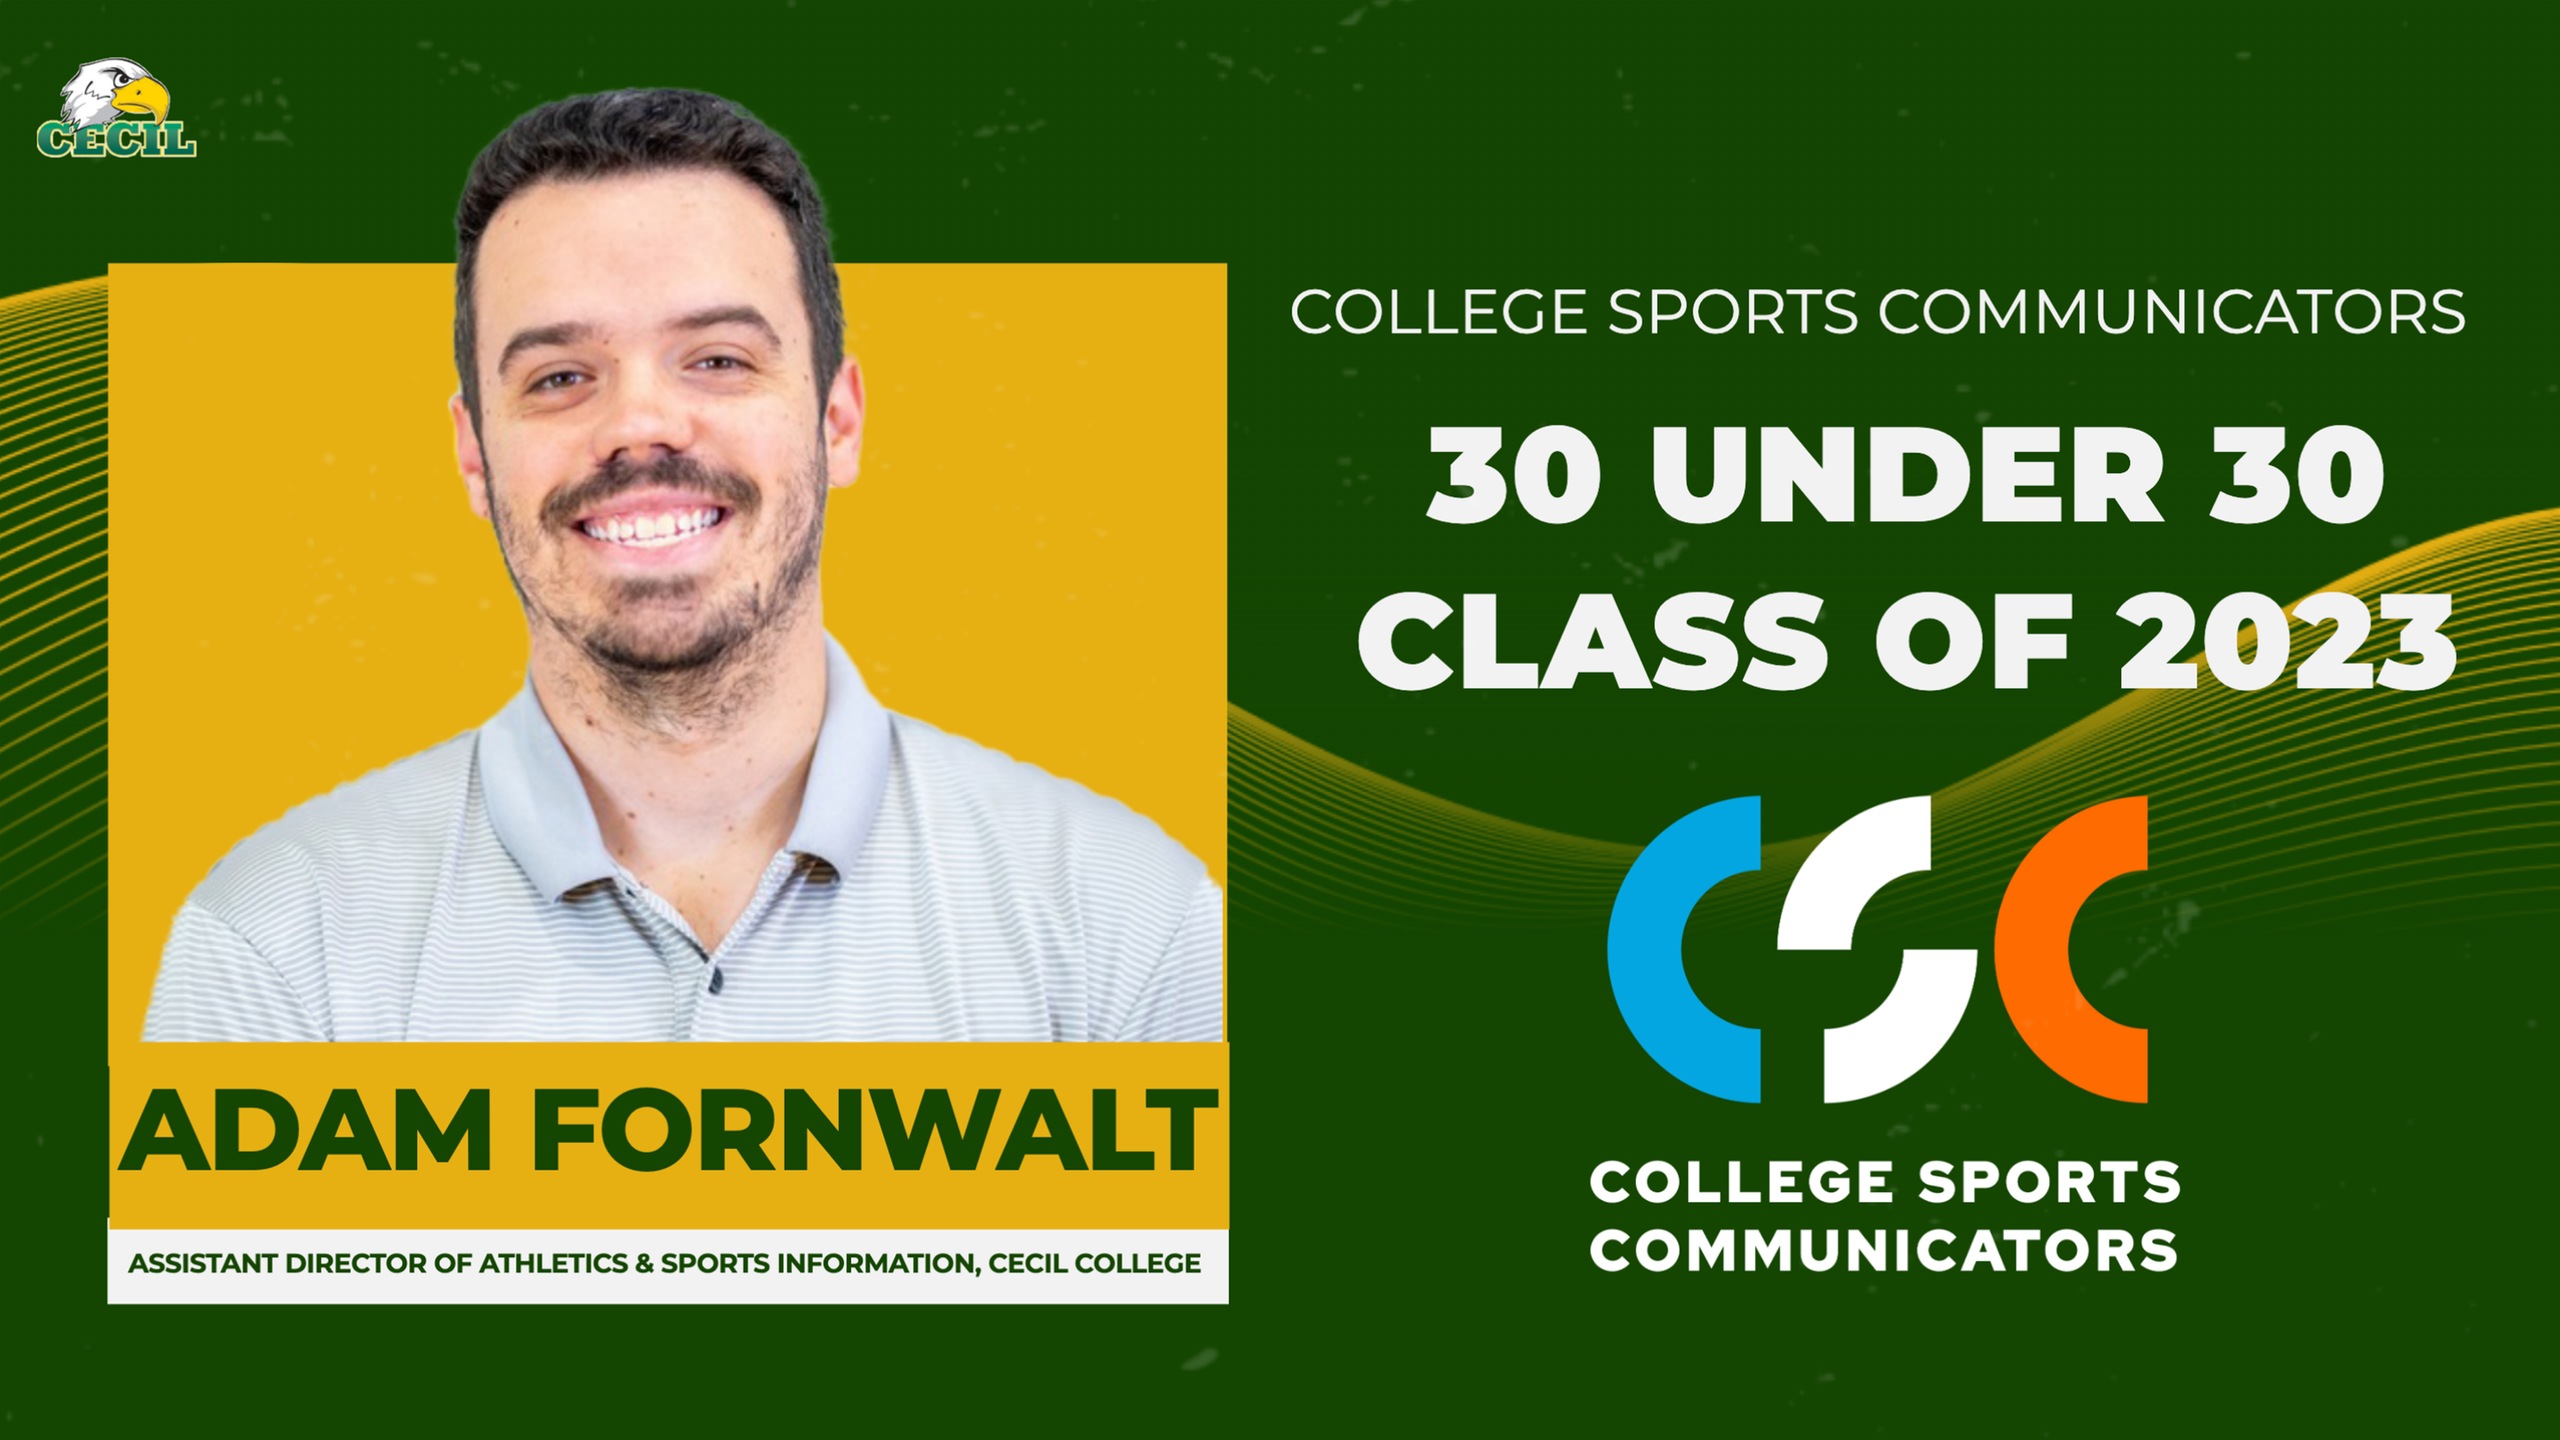 Cecil's Fornwalt Named to CSC 30 Under 30 Class of 2023